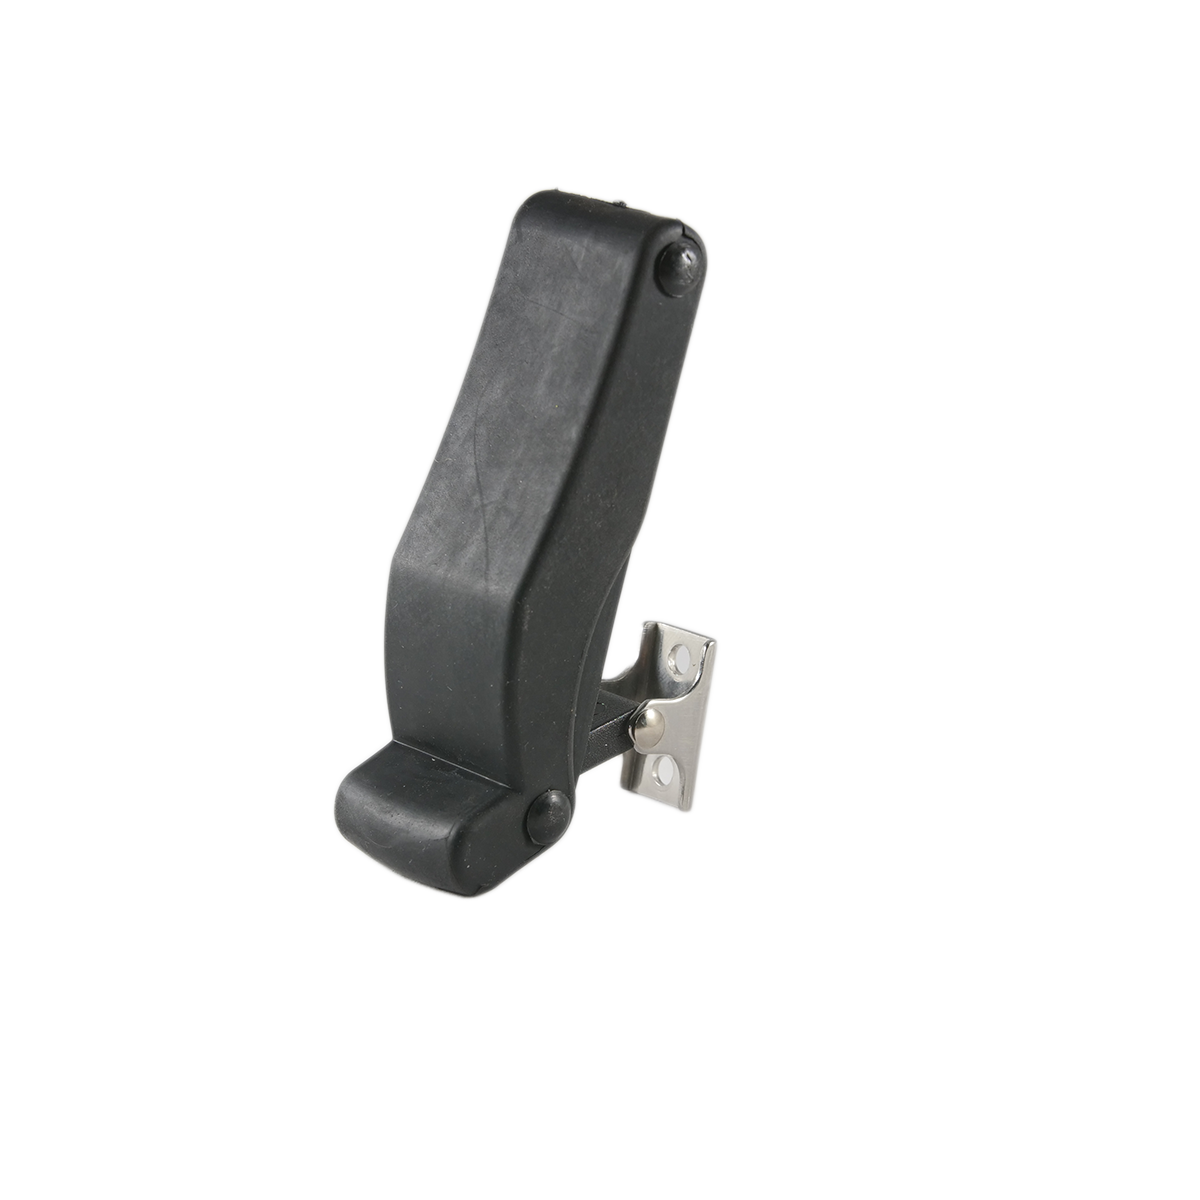 Featuring the Canyon Spare Latch cooler manufactured by Canyon shown here from one angle.